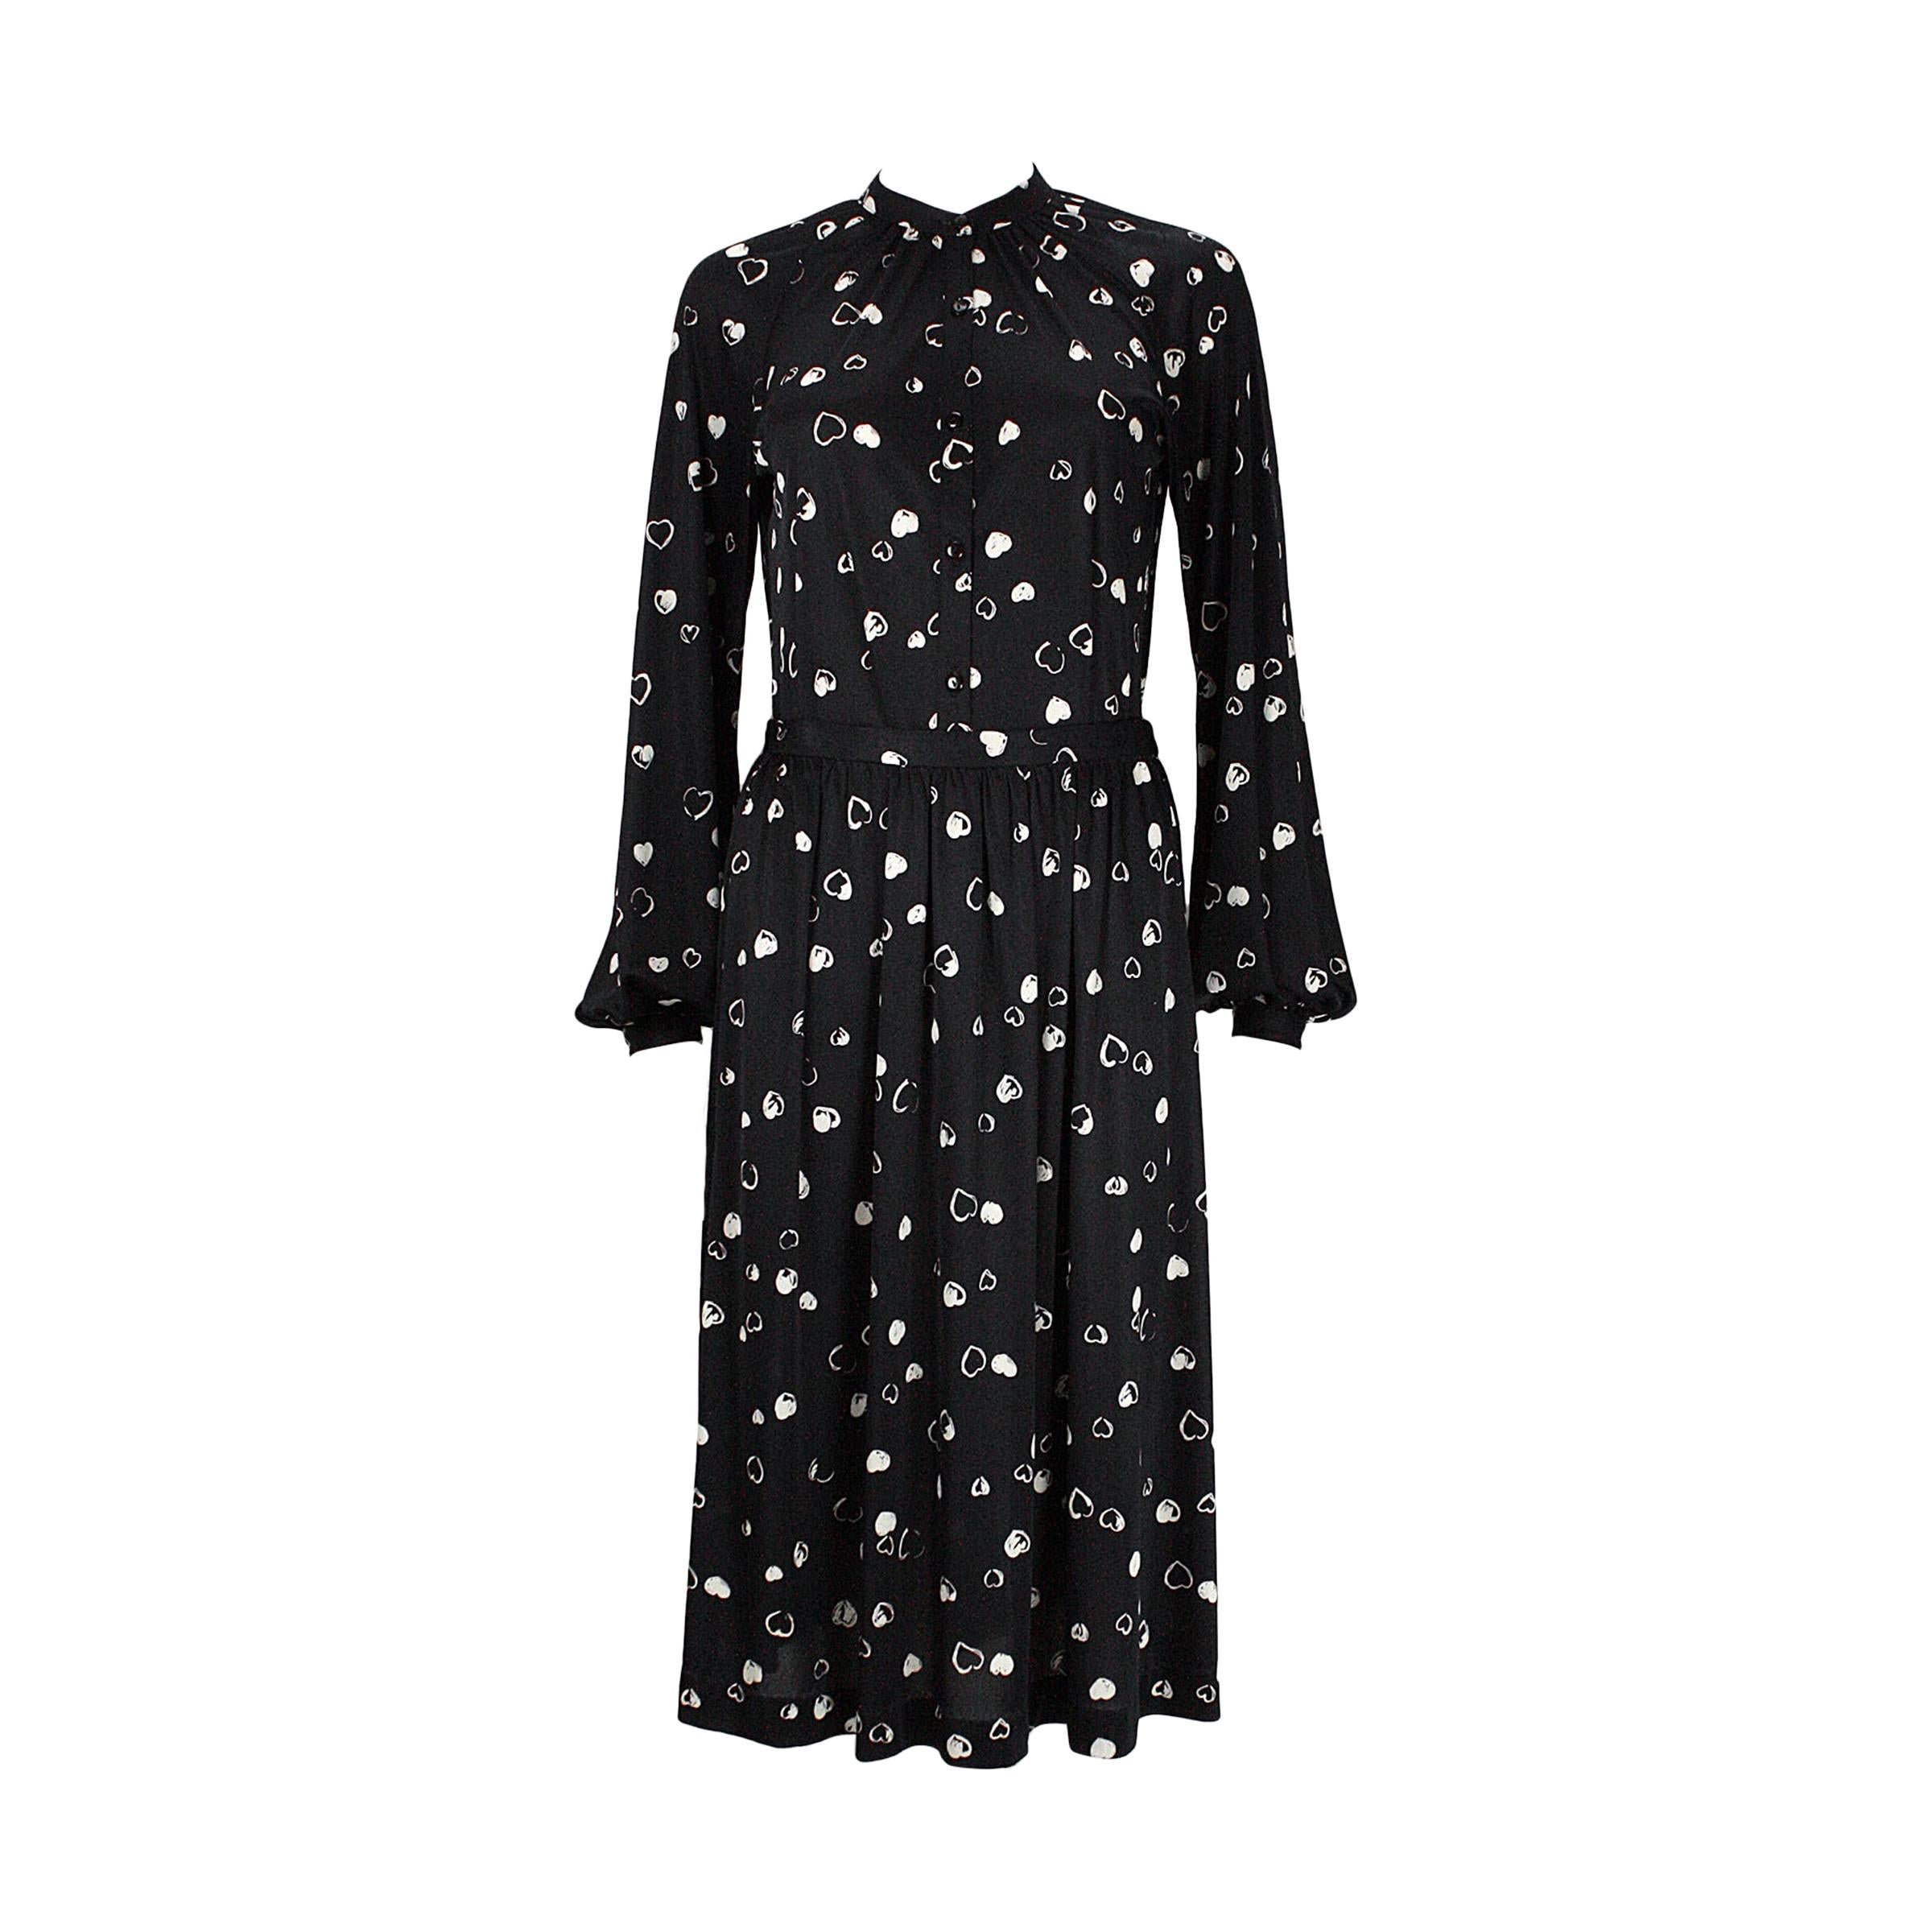 1970s Halston Black and White Heart Print Button-Down Shirt and Skirt For Sale